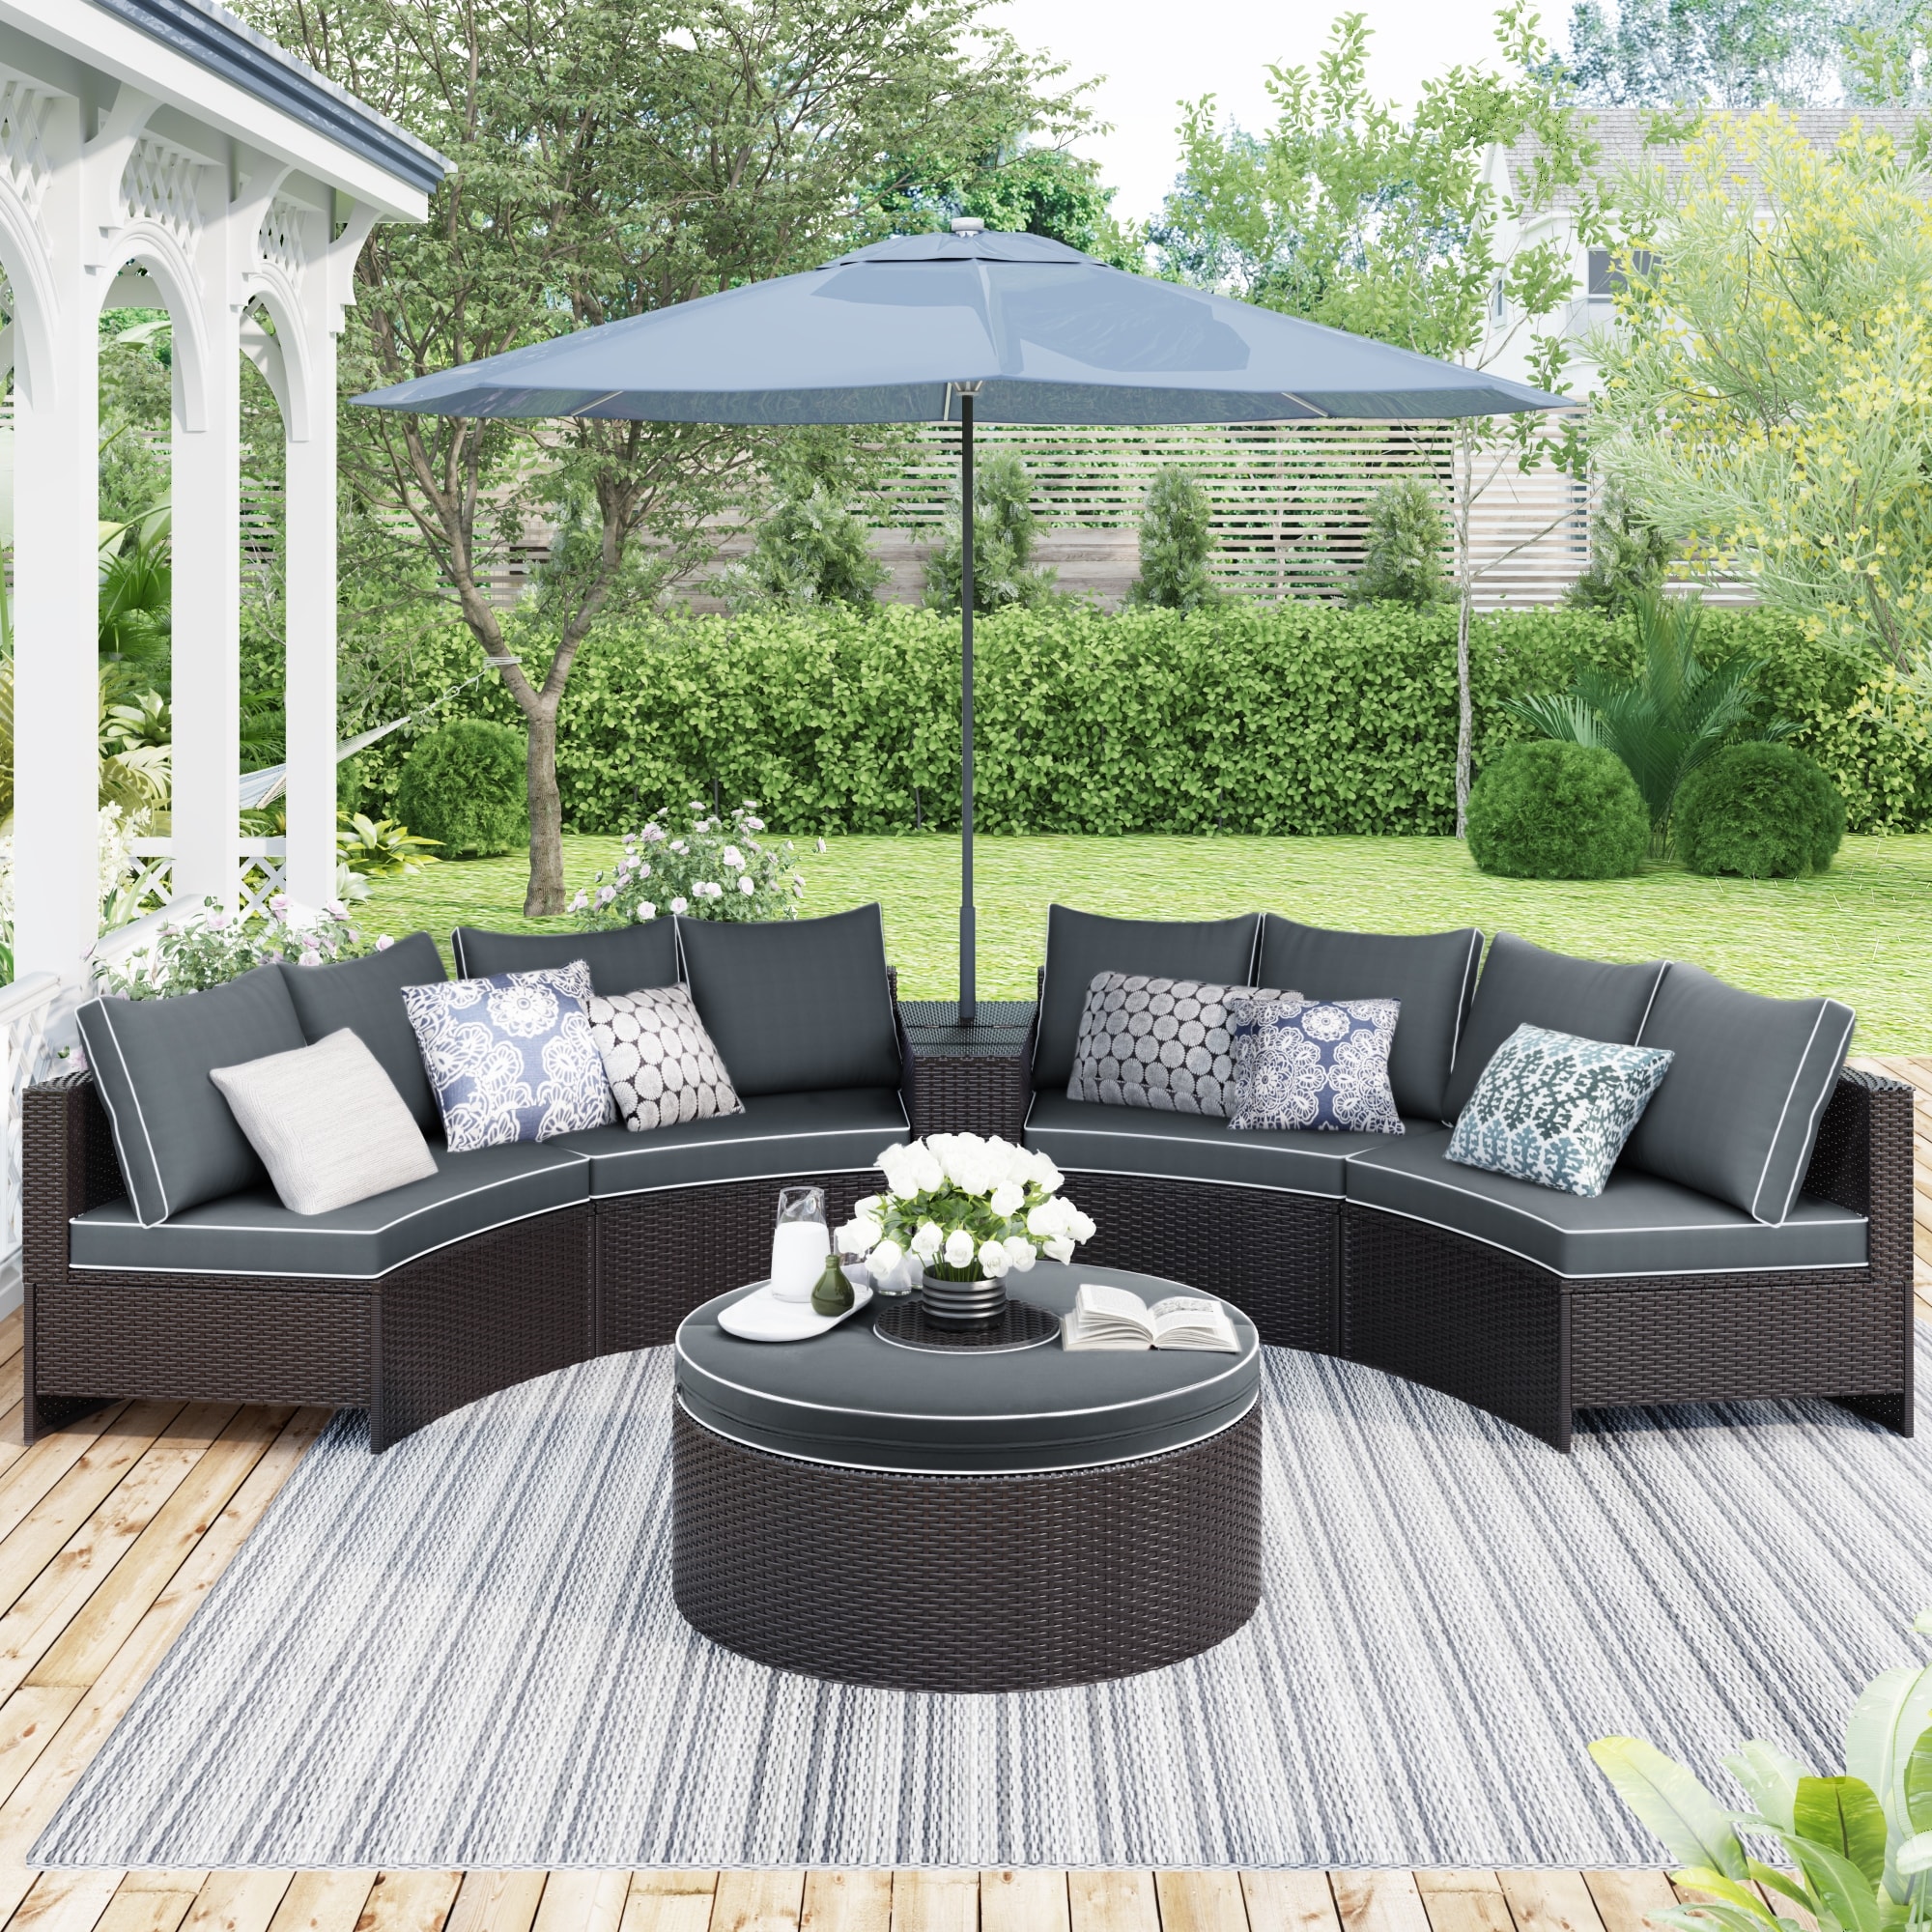 6 Pieces Outdoor Sectional Sofa  Half Round Patio Rattan Conversation Set  Storage Side Table For Umbrella And Round Table